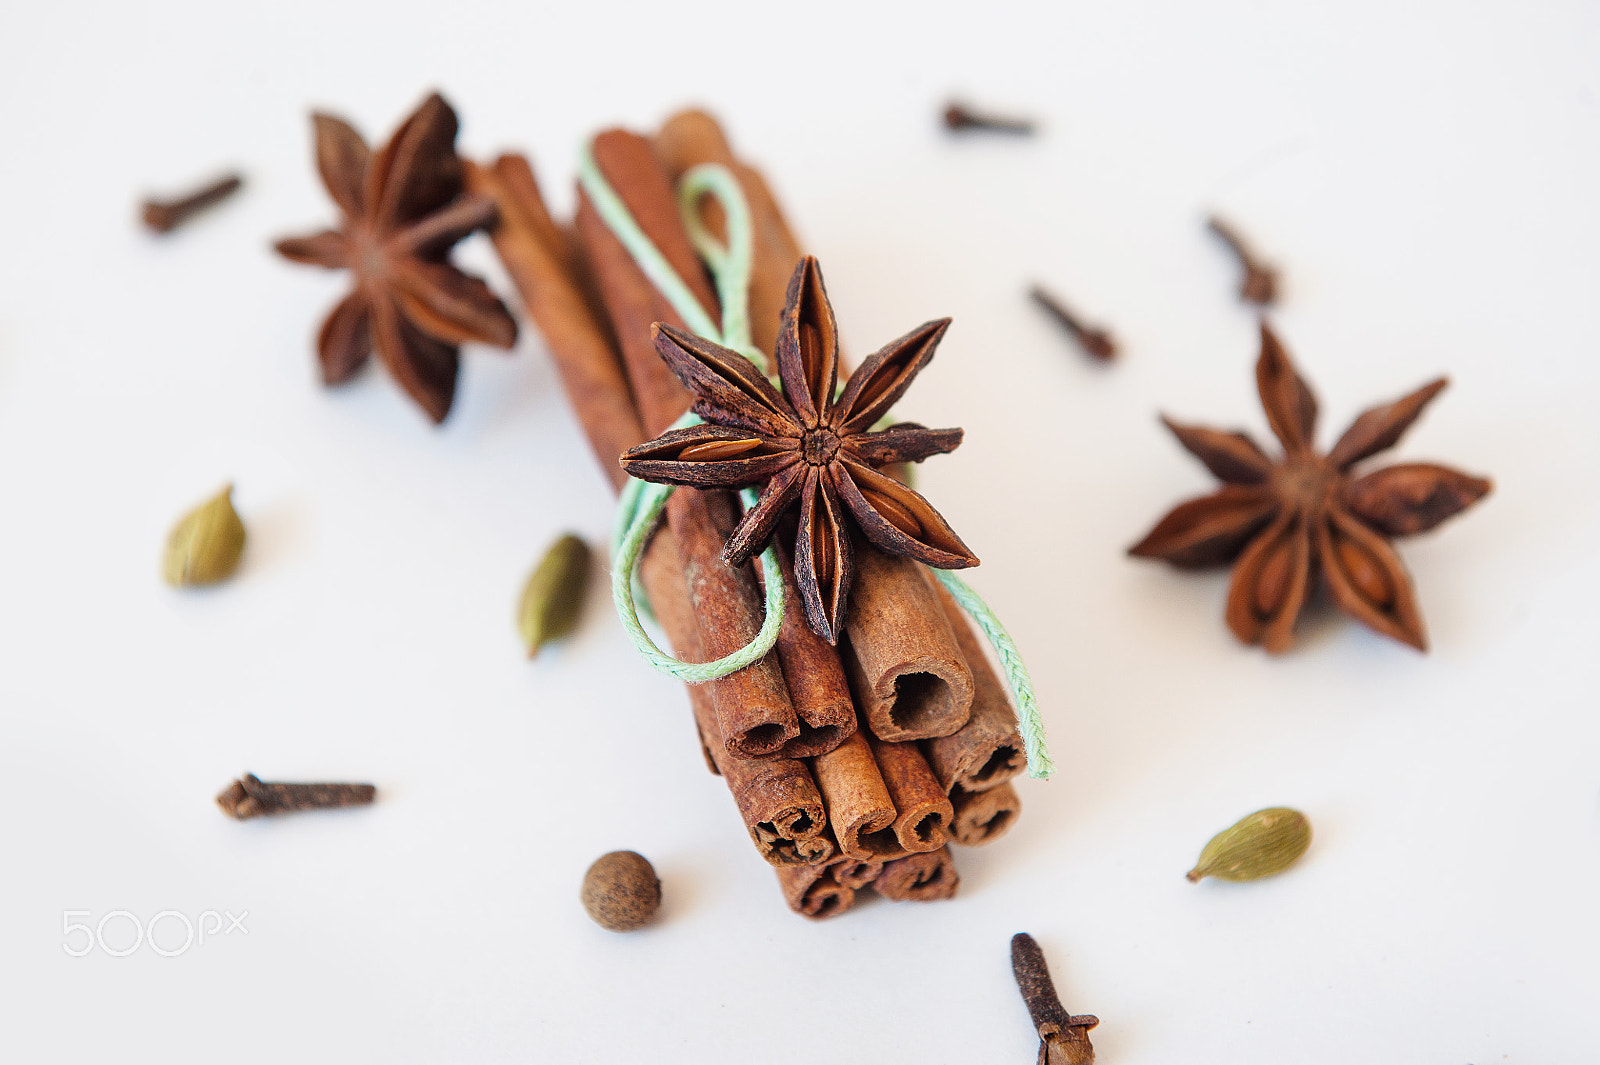 Nikon D700 sample photo. Star anise and cinnamon on white background photography